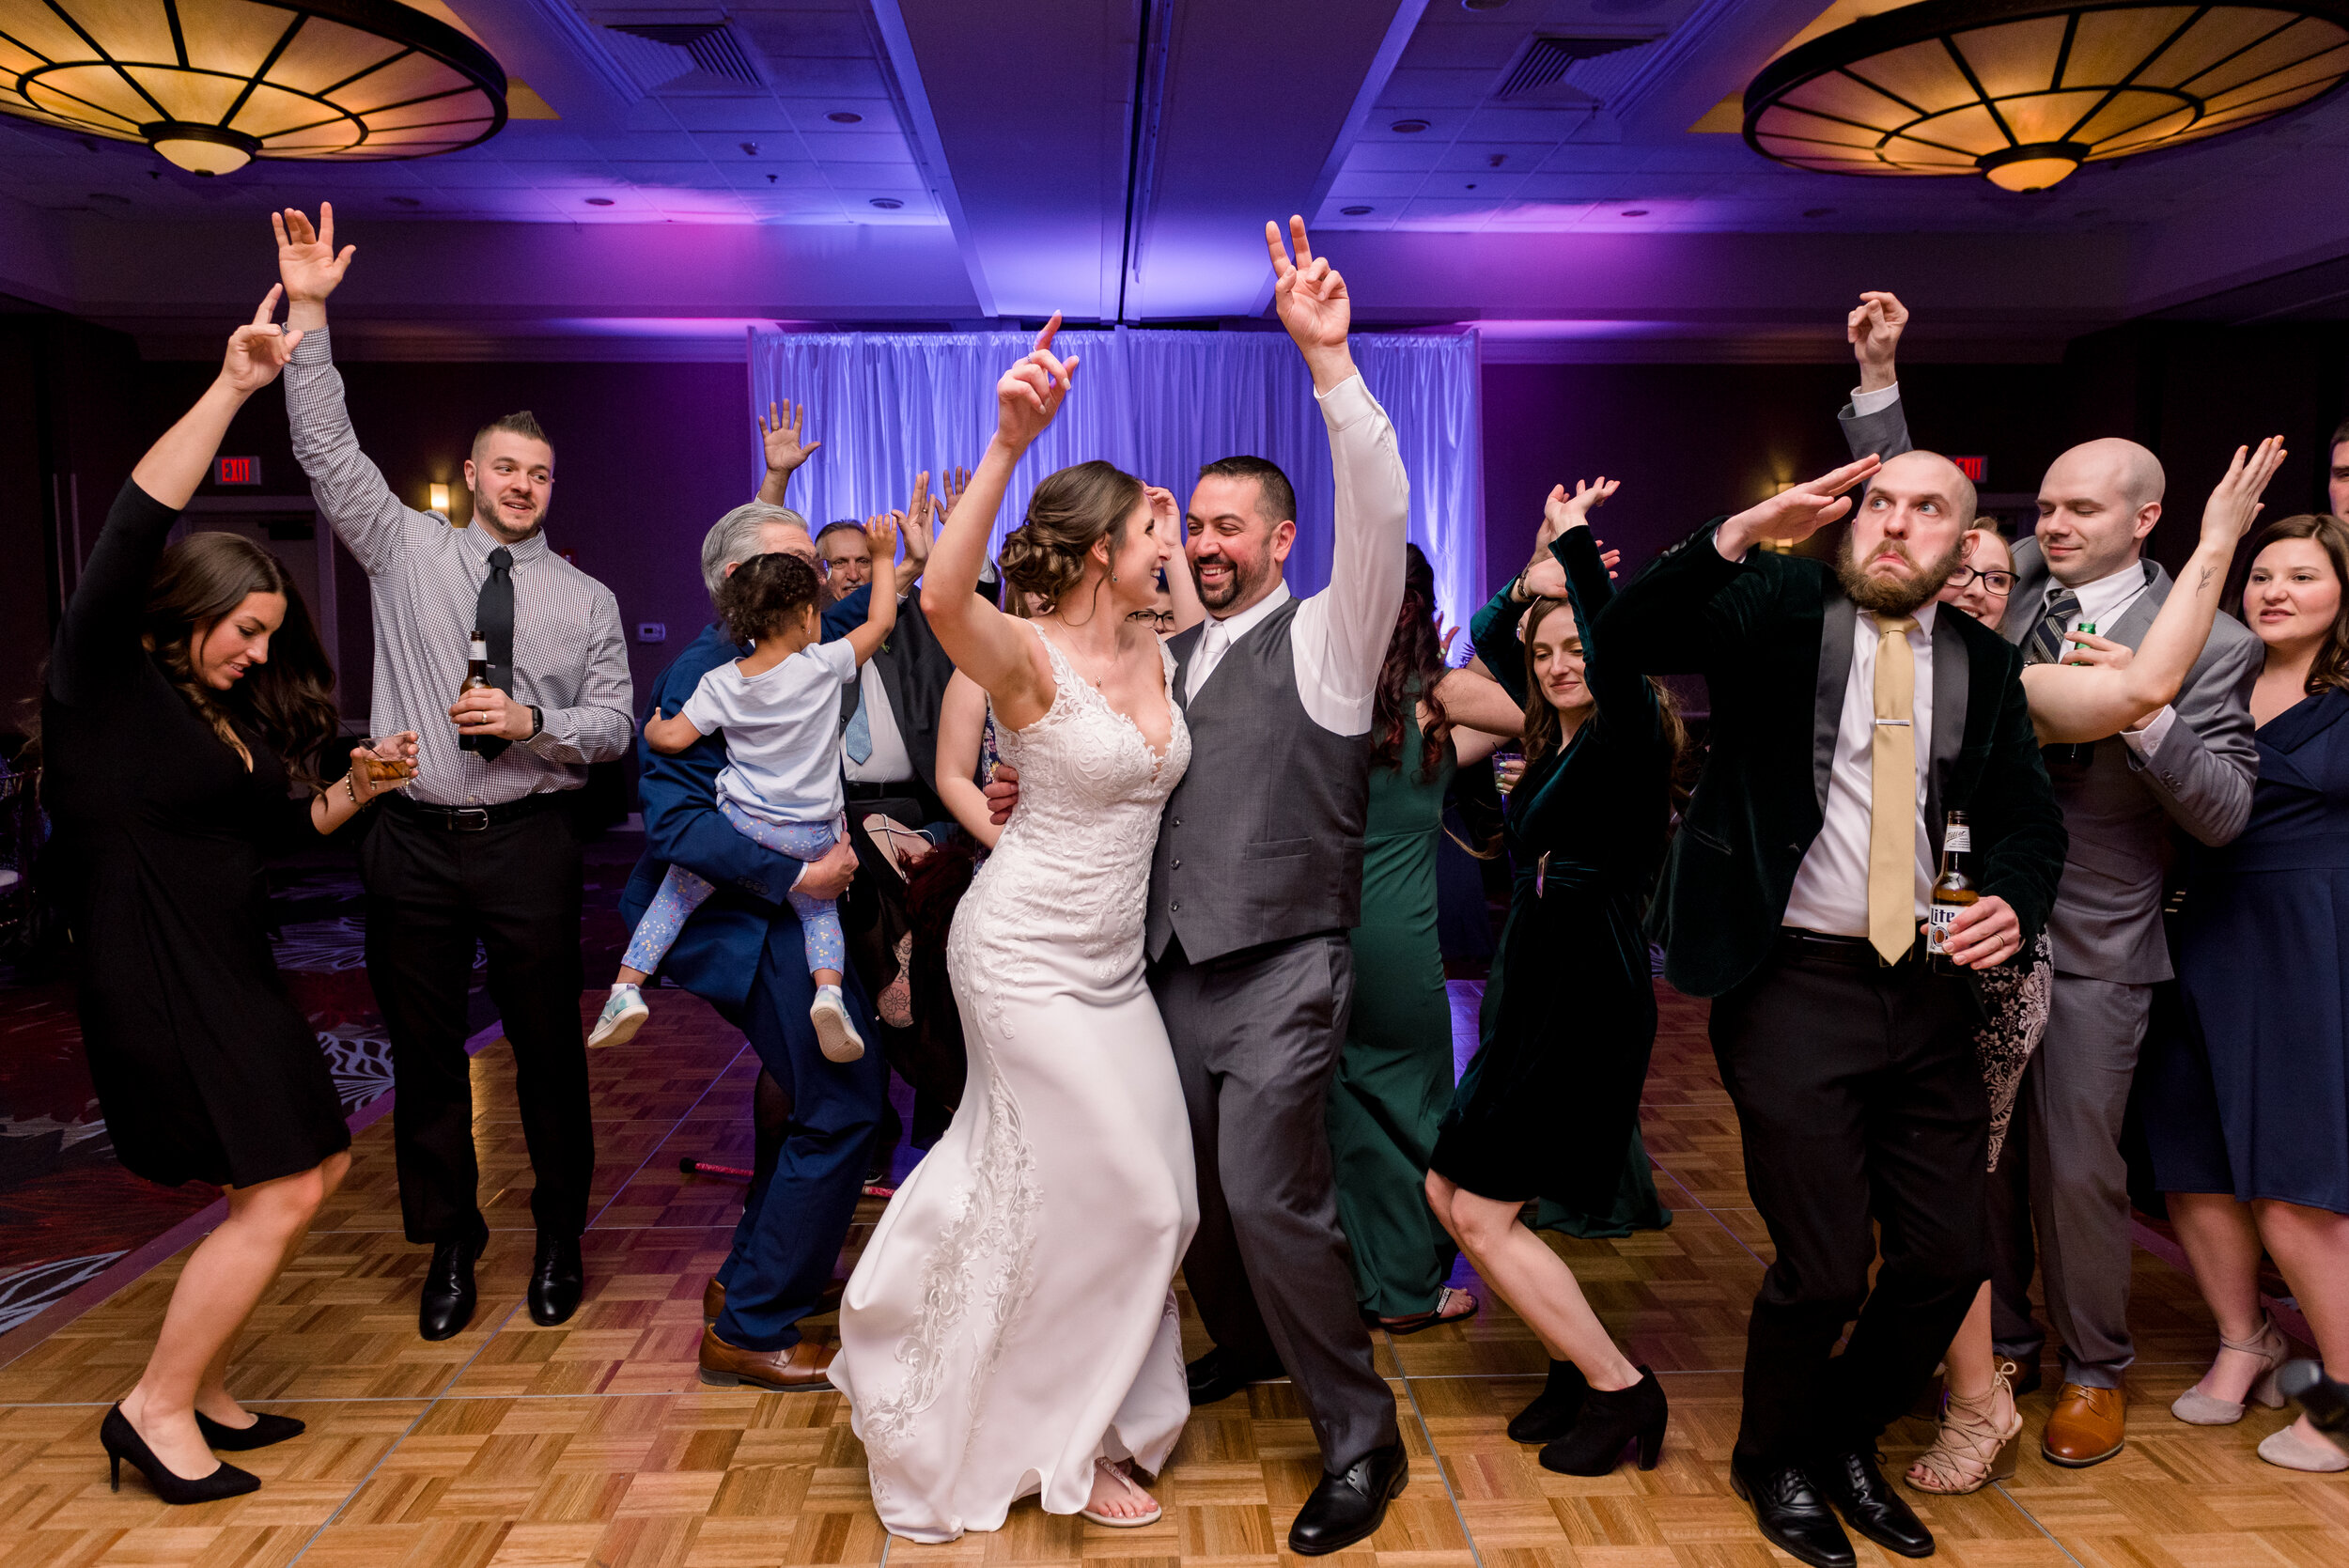 Weddings-at-The-DoubleTree-by-Hilton-Hotel-Pittsburgh-Ashley-Reed-Photography-97.jpg